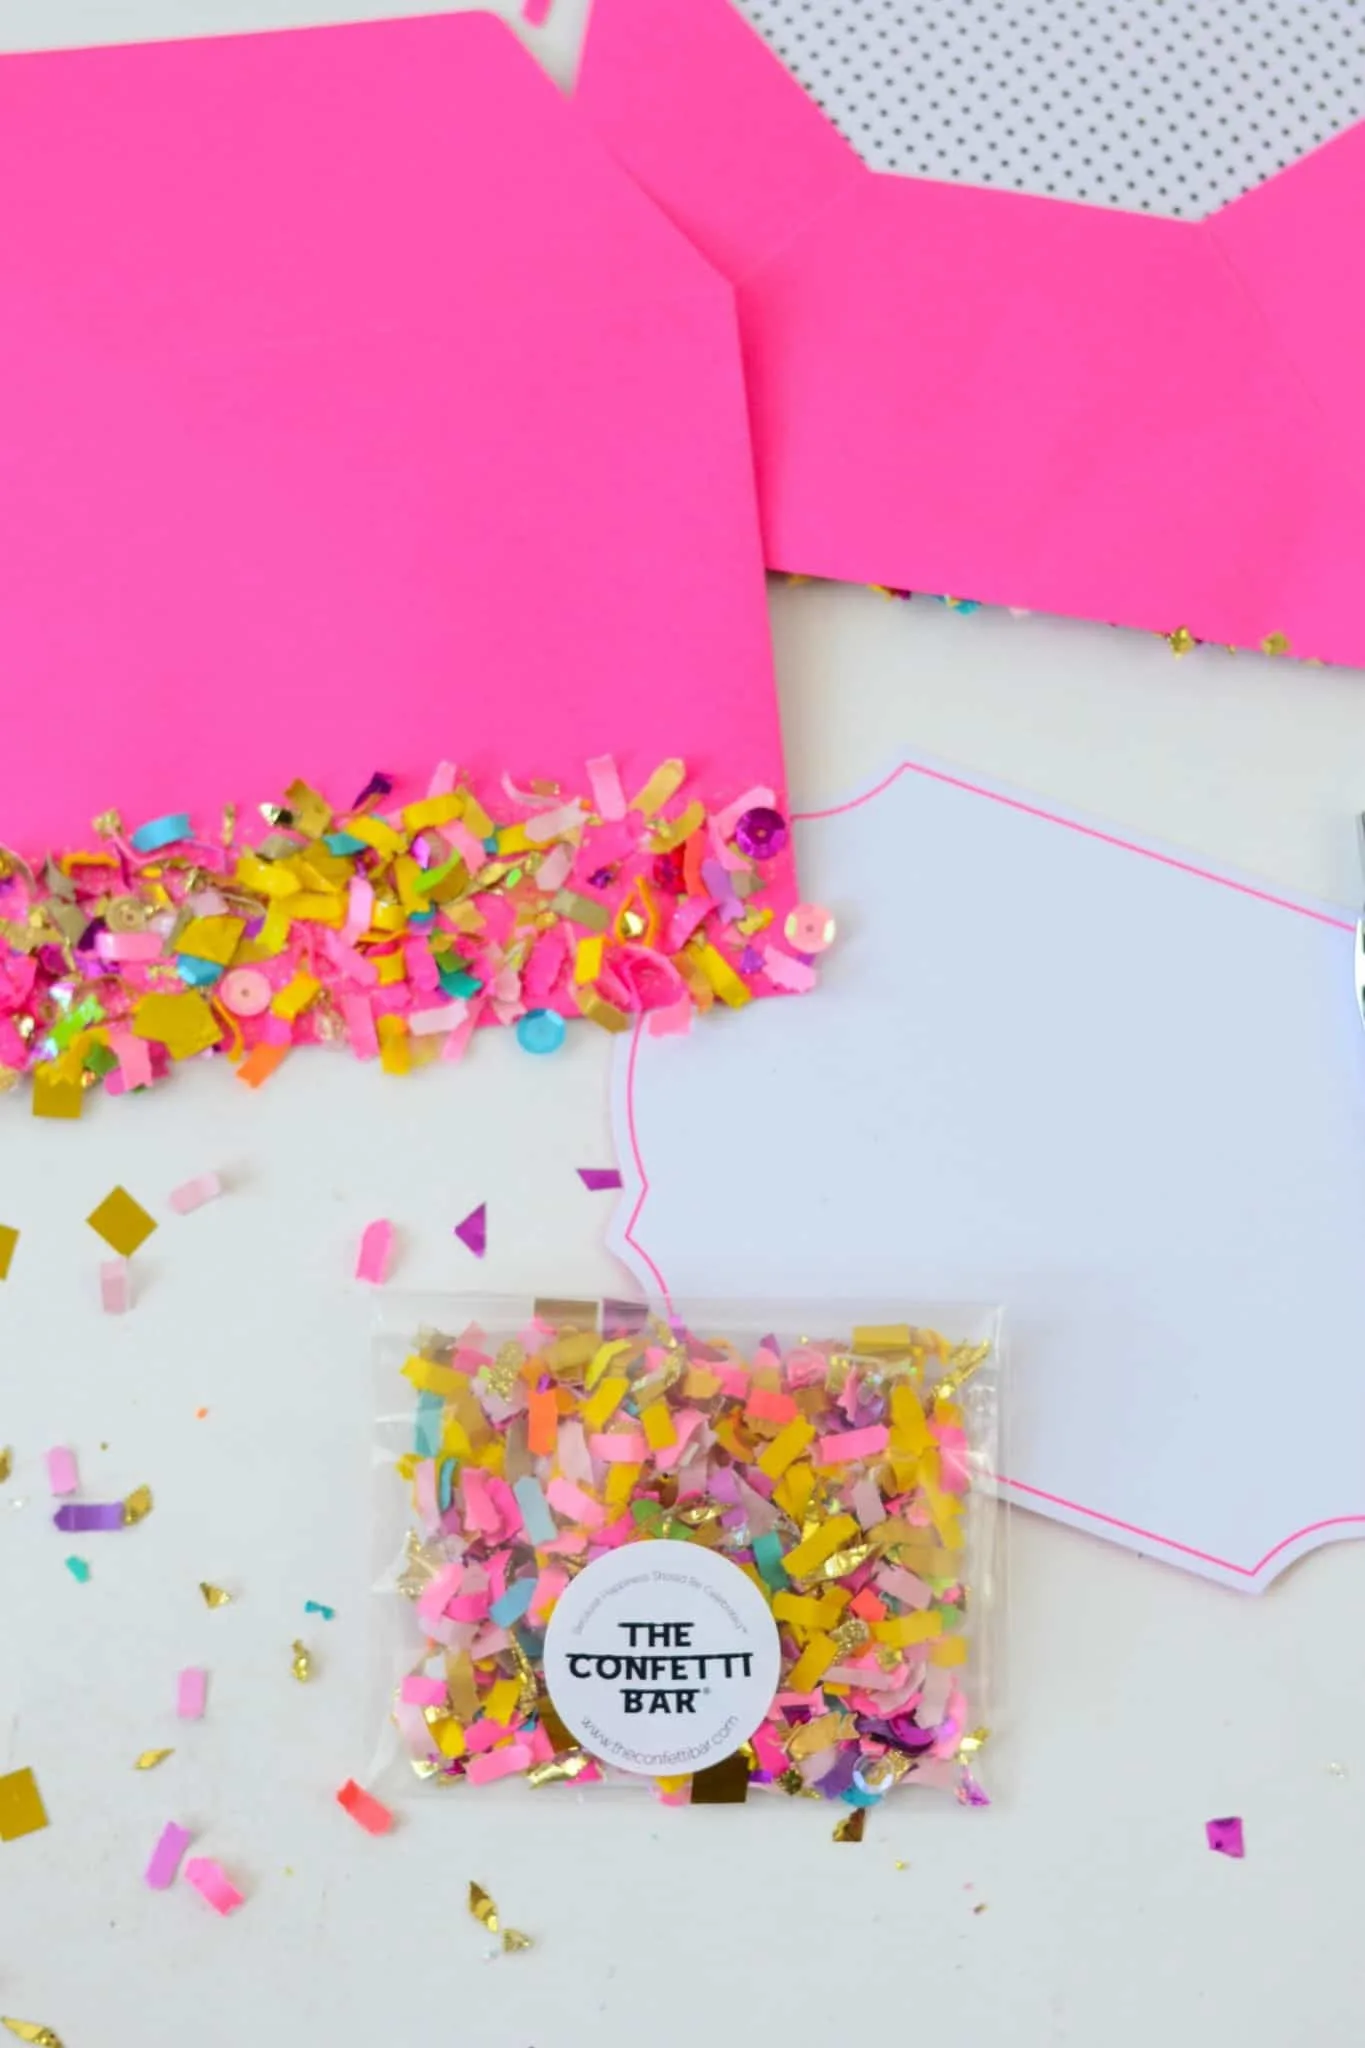 Close up of a confetti package from The Confetti Bar